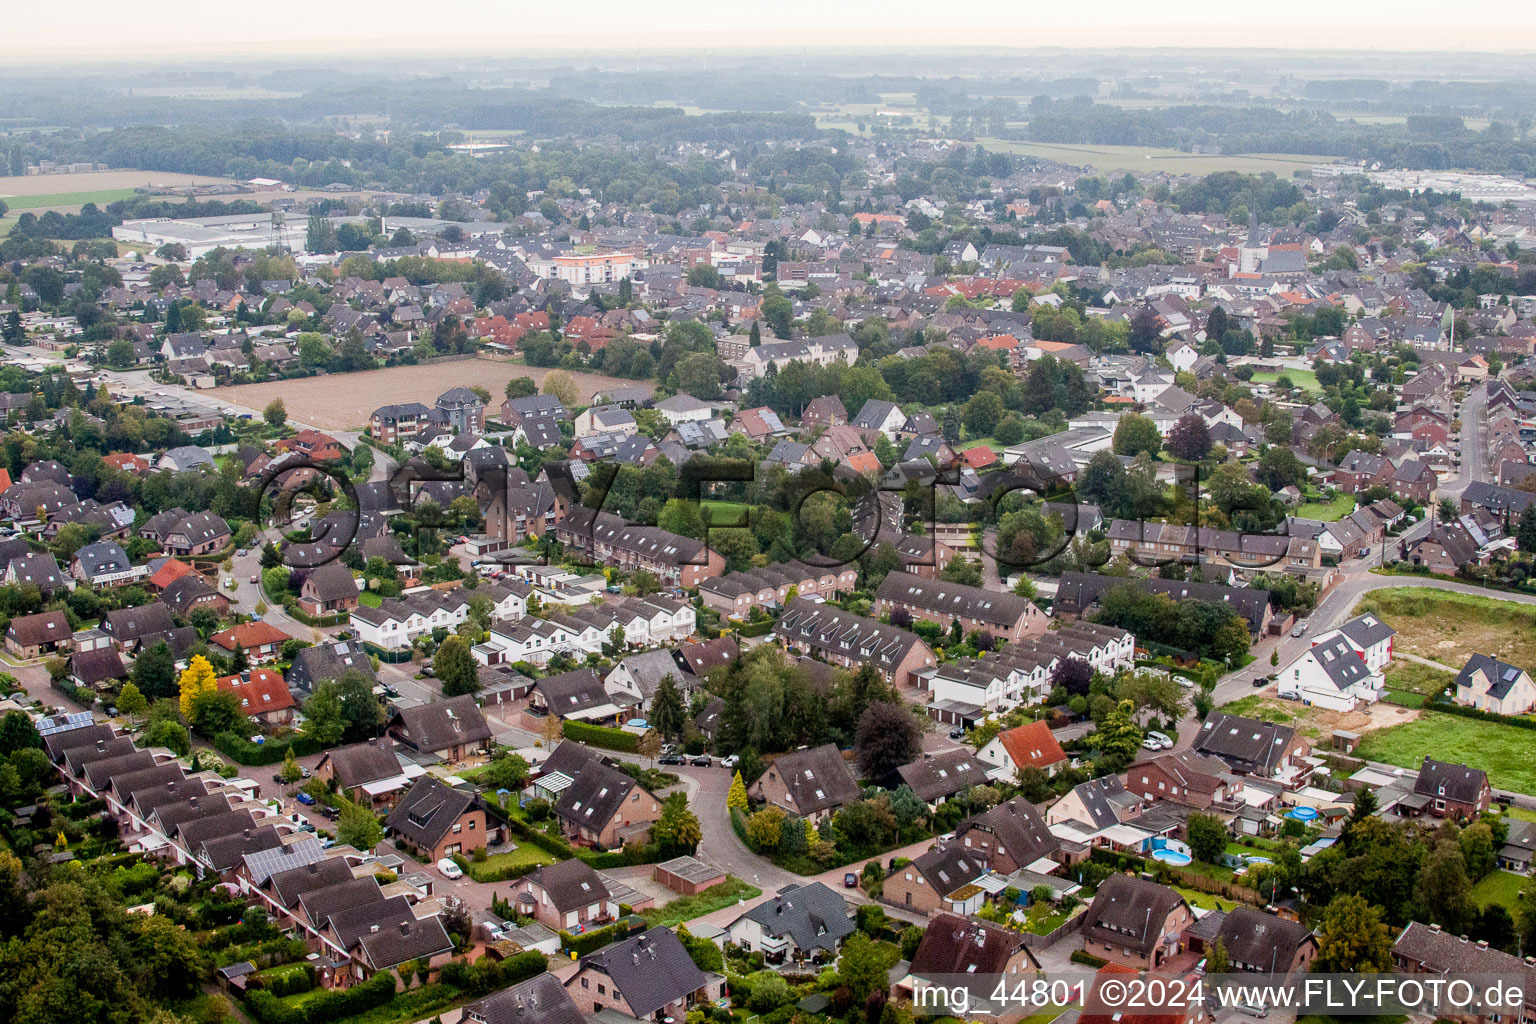 Town View of the streets and houses of the residential areas in Grefrath in the state North Rhine-Westphalia, Germany